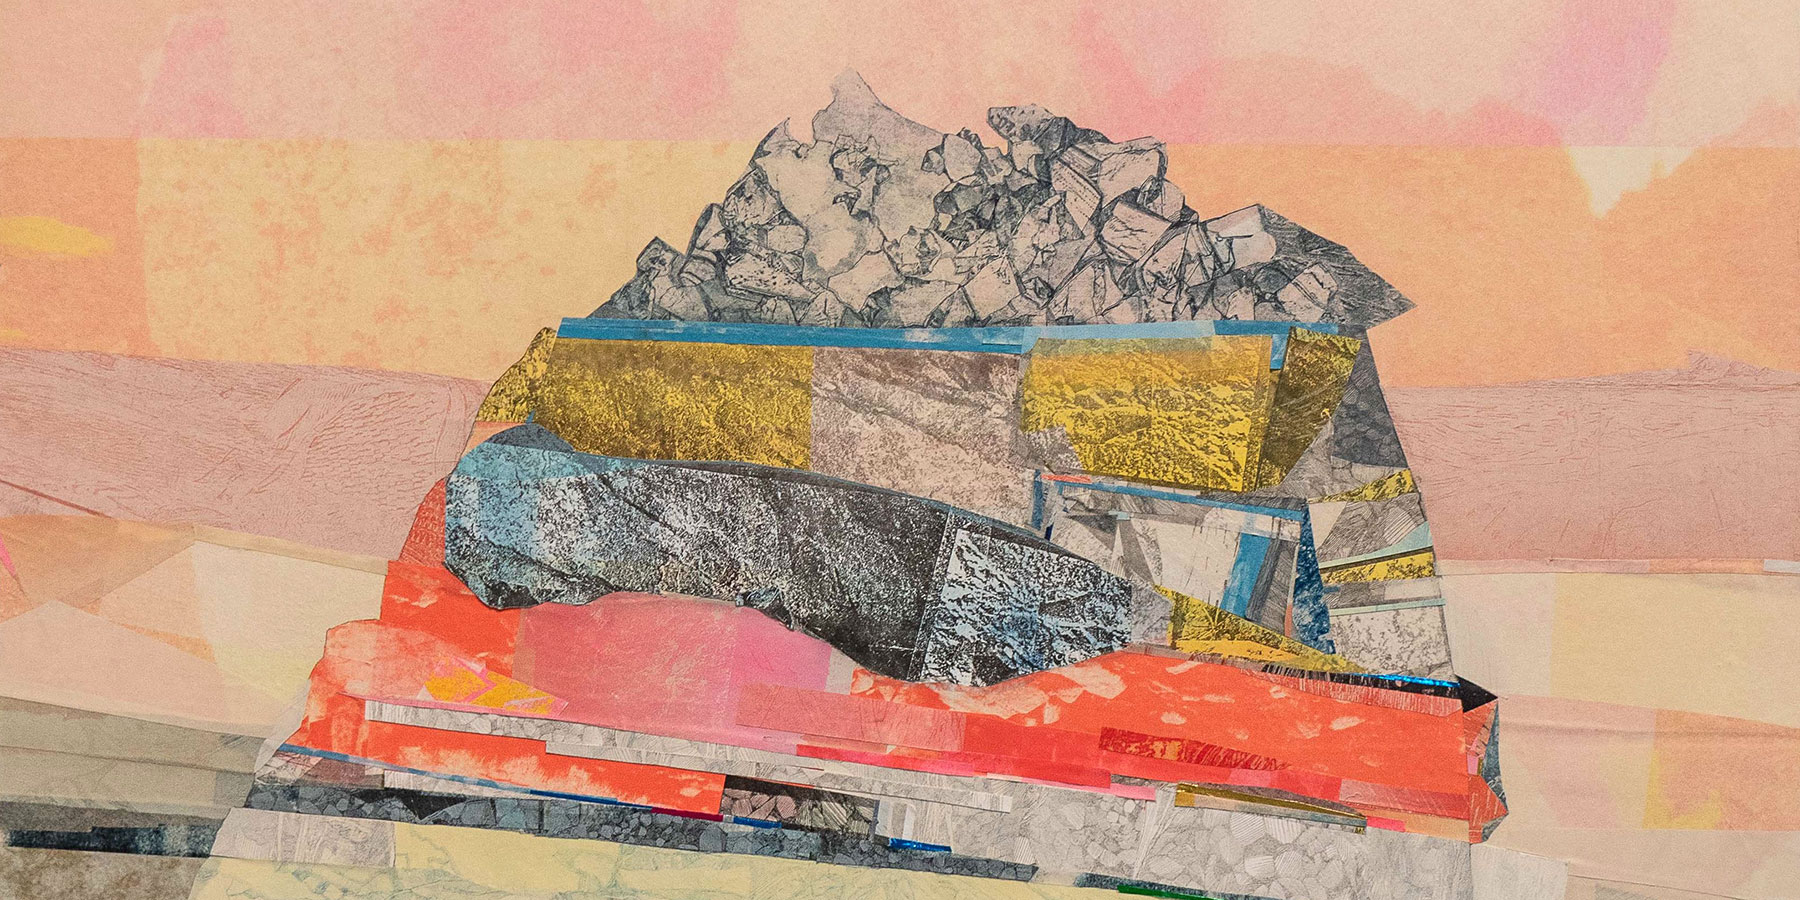 Print with many layered colors and textures that form a boulder in the center of a flat landscape.